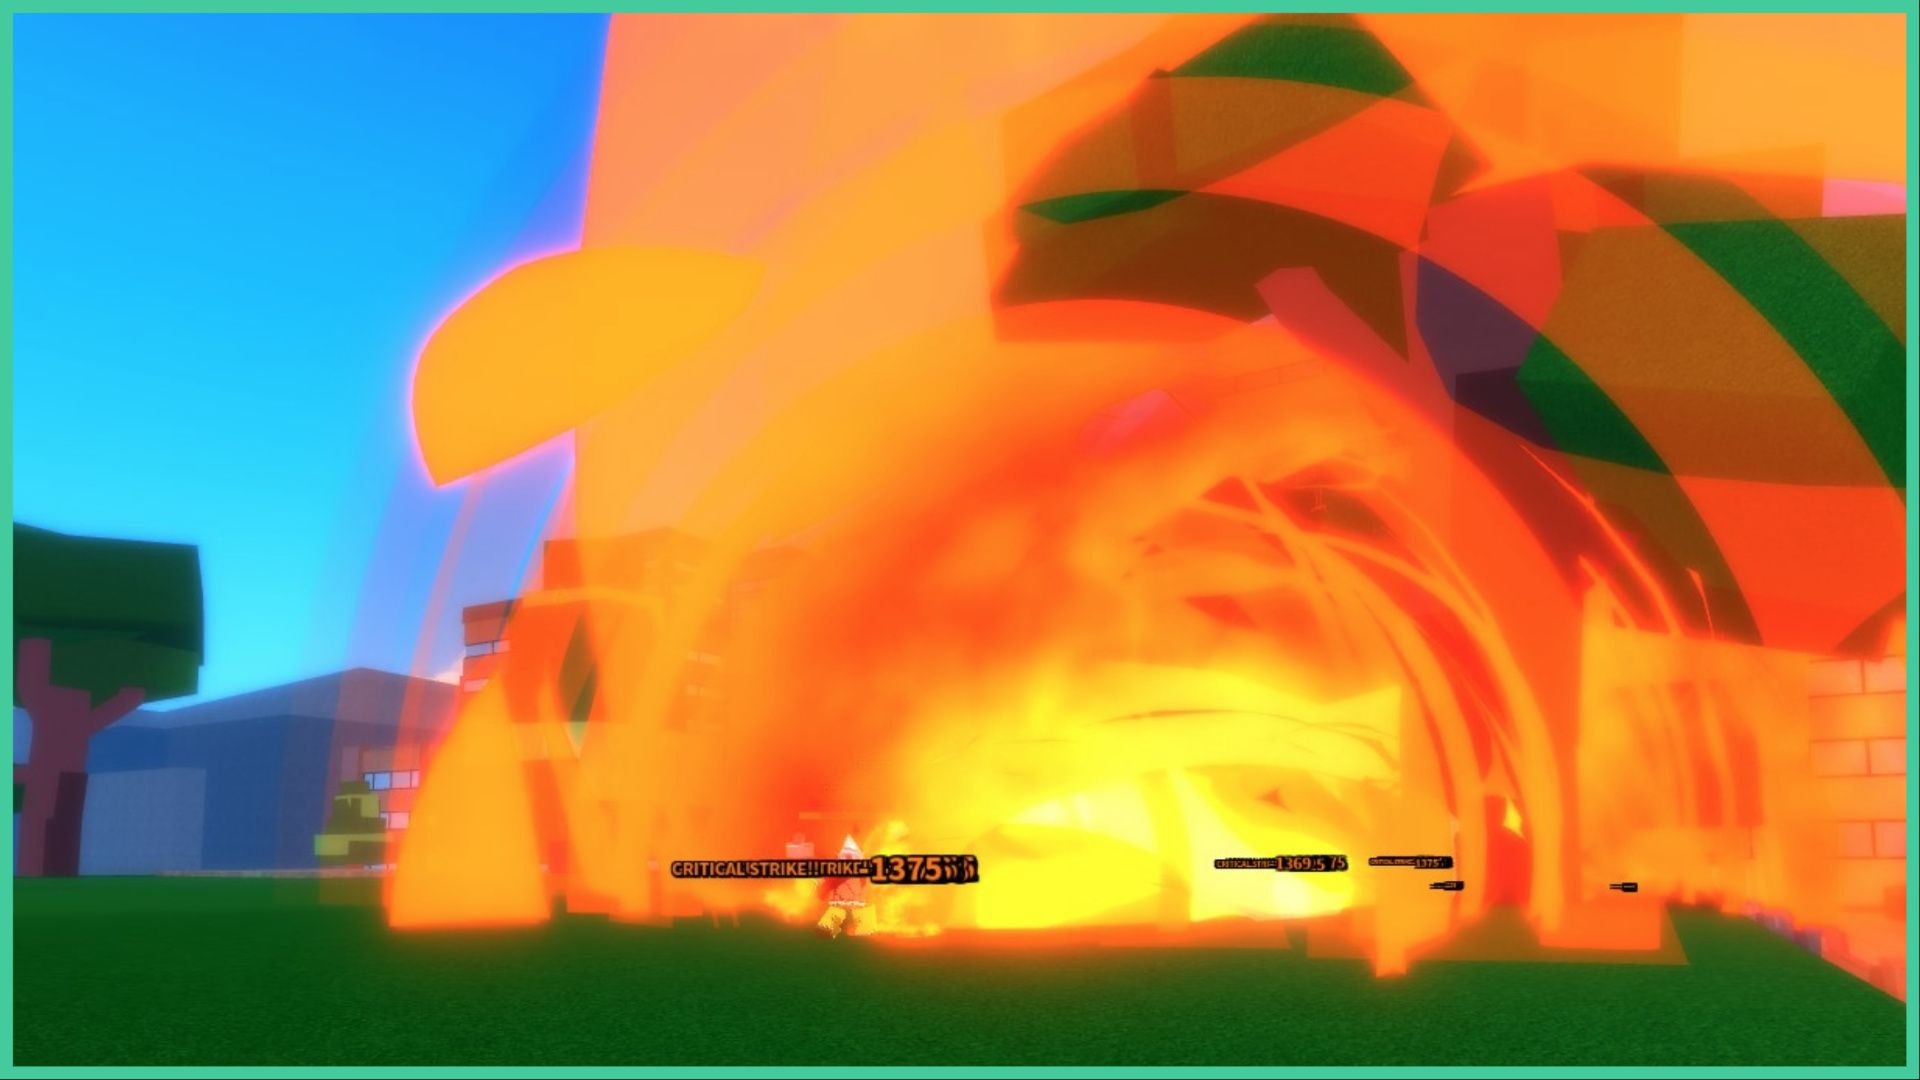 feature image for our project xl sharingan tier list, the image features a screenshot of game with a giant ball of fire exploding over the grass as people fight, there are trees and buildings in the background